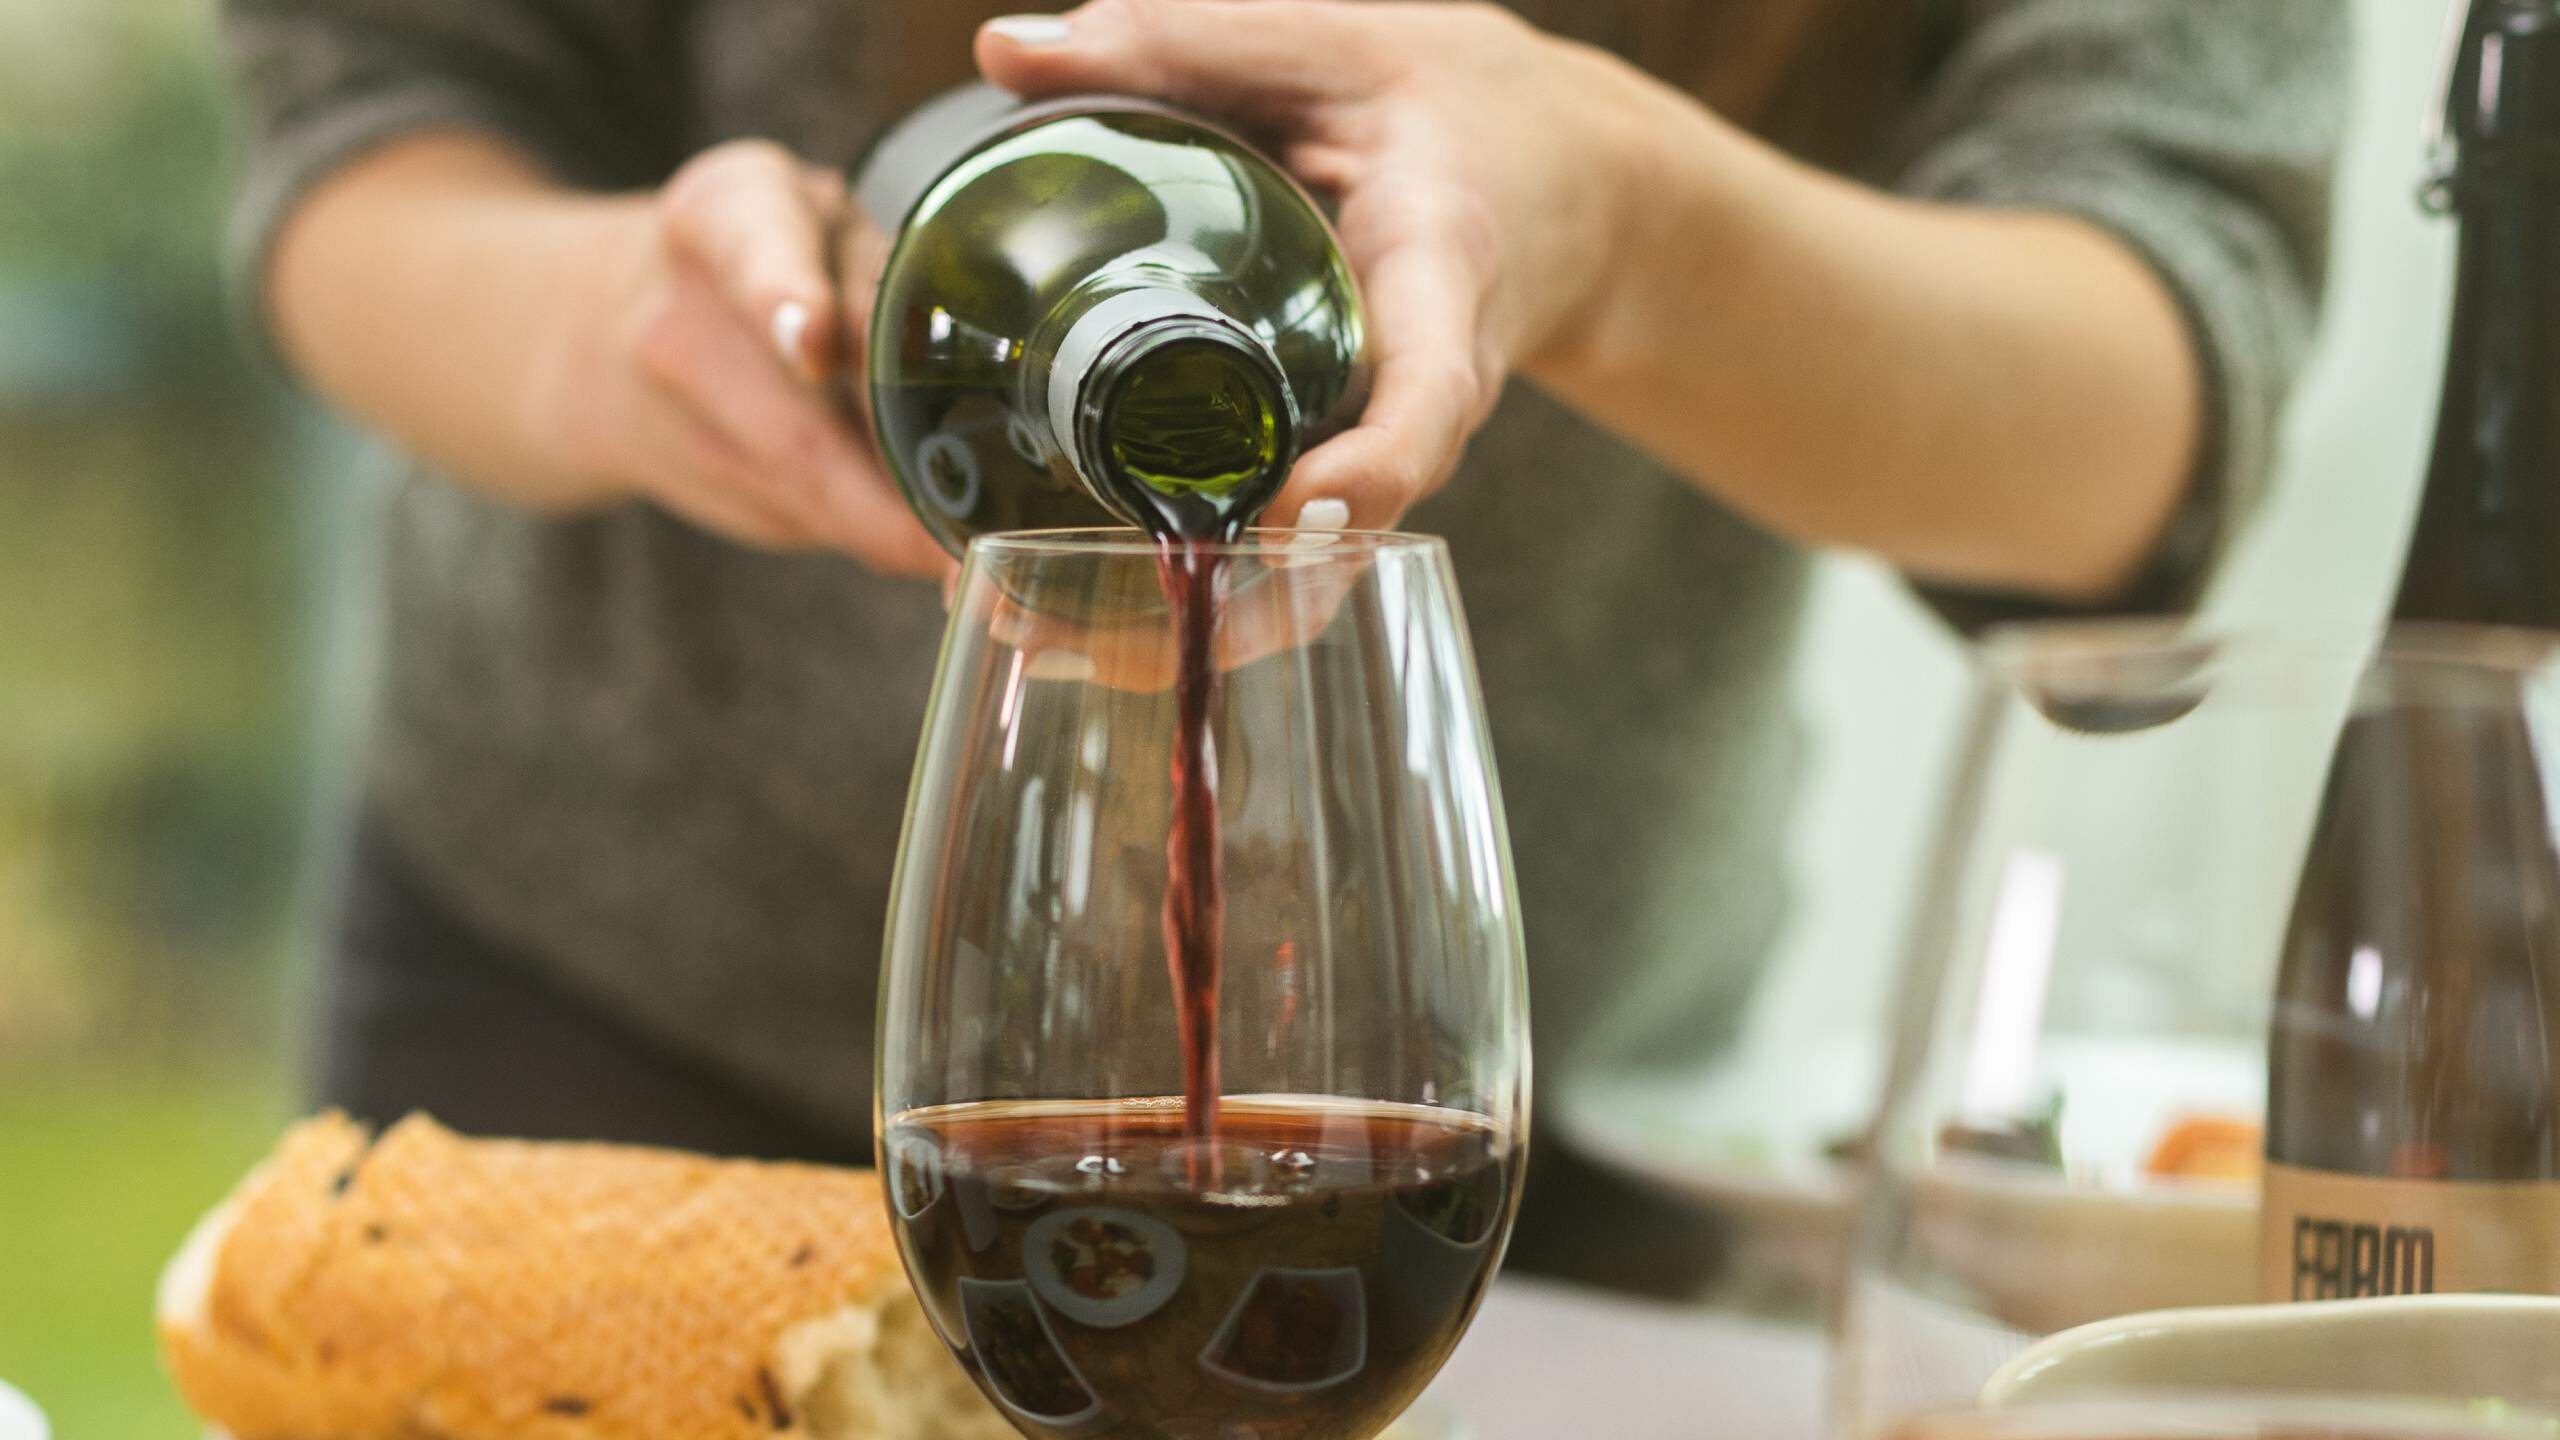 https://www.virginwines.co.uk/hub/wp-content/uploads/2023/02/Woman-pouring-red-wine-served-at-the-right-temperature-into-a-glass-on-a-table-with-food-2560x1440.jpg